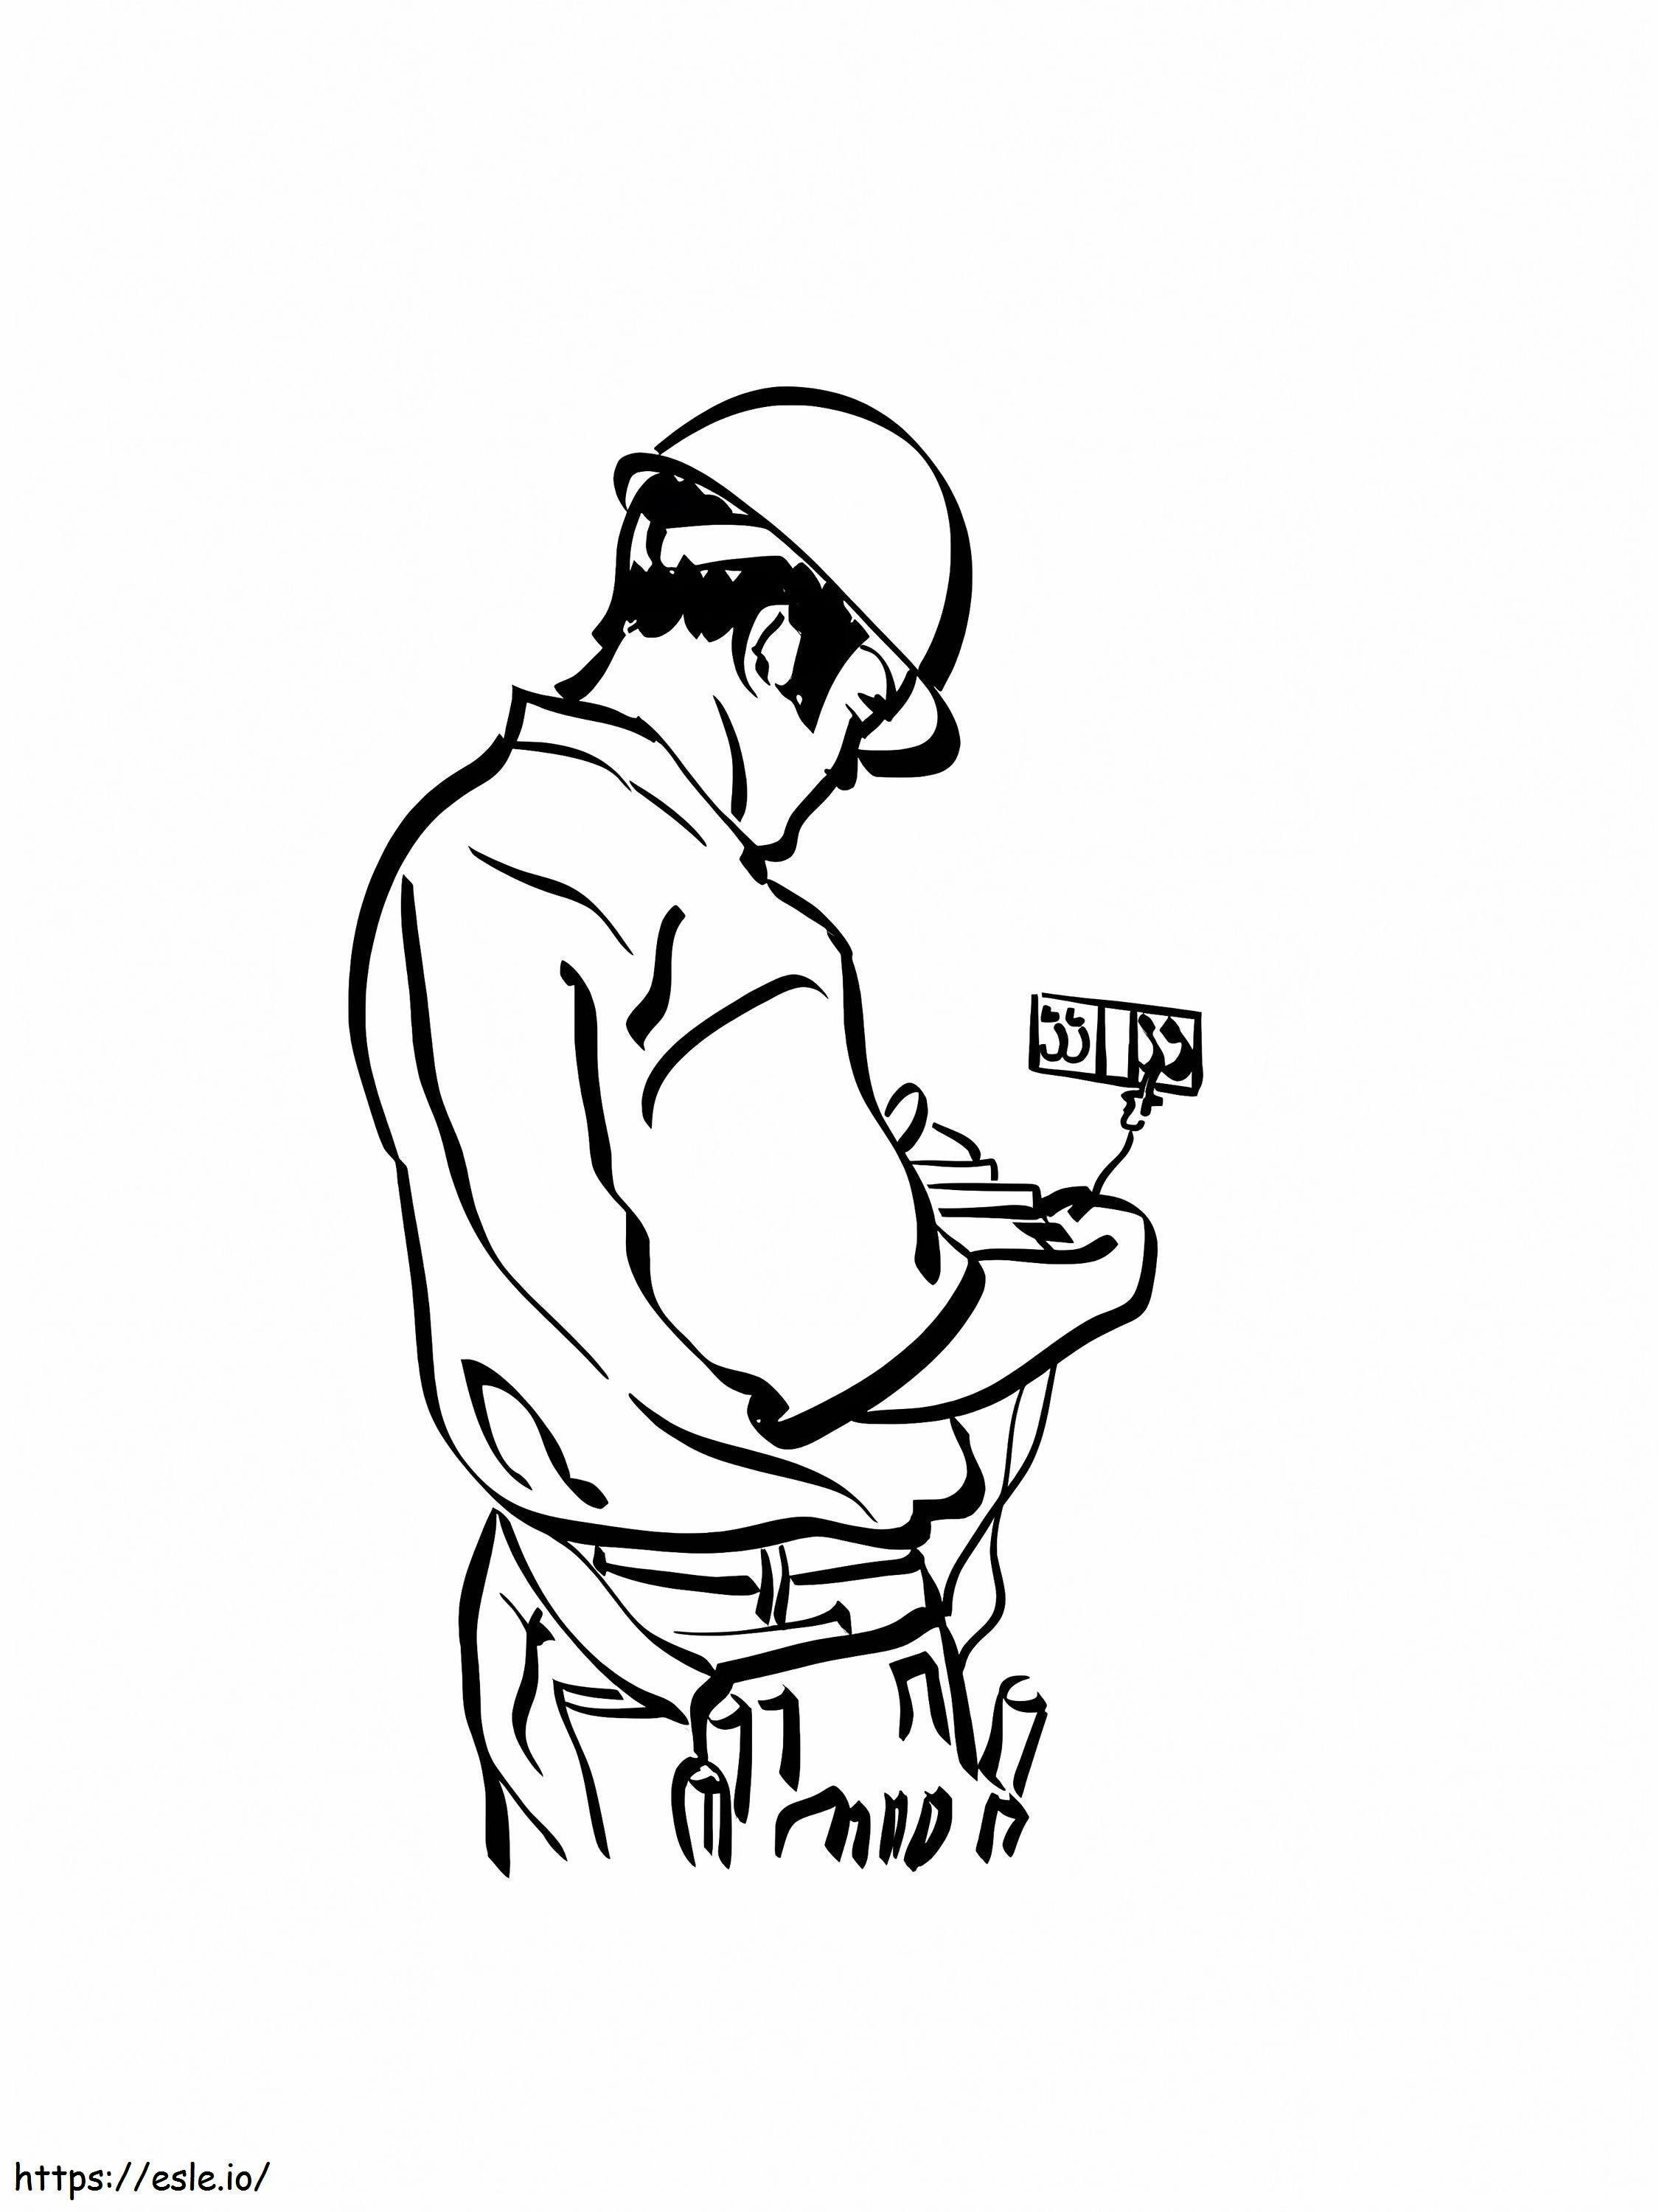 Electrician 2 coloring page